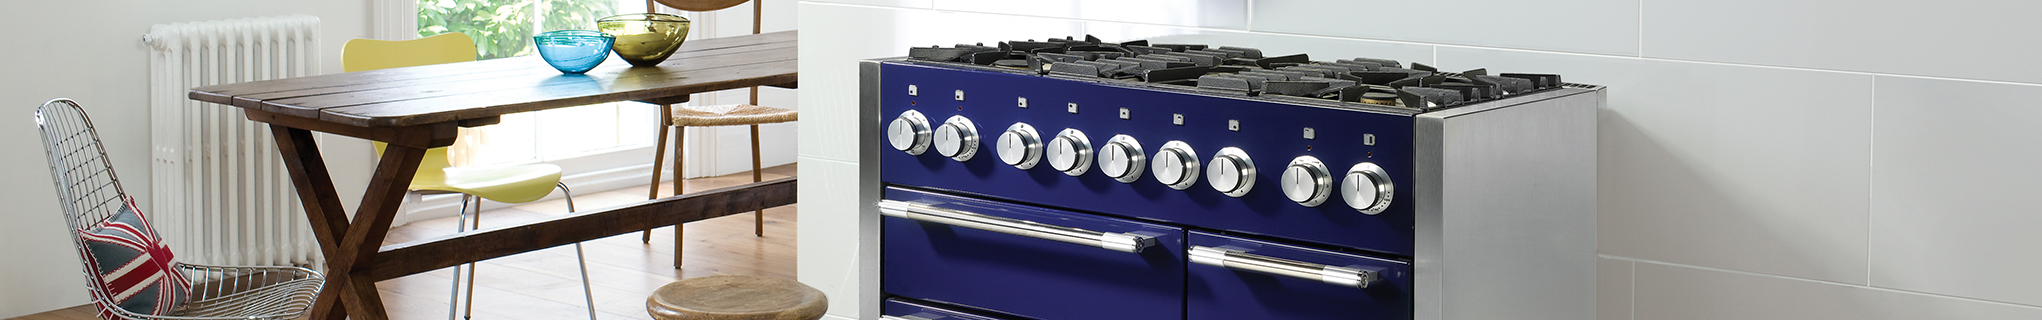 AGA Conventional Cookers